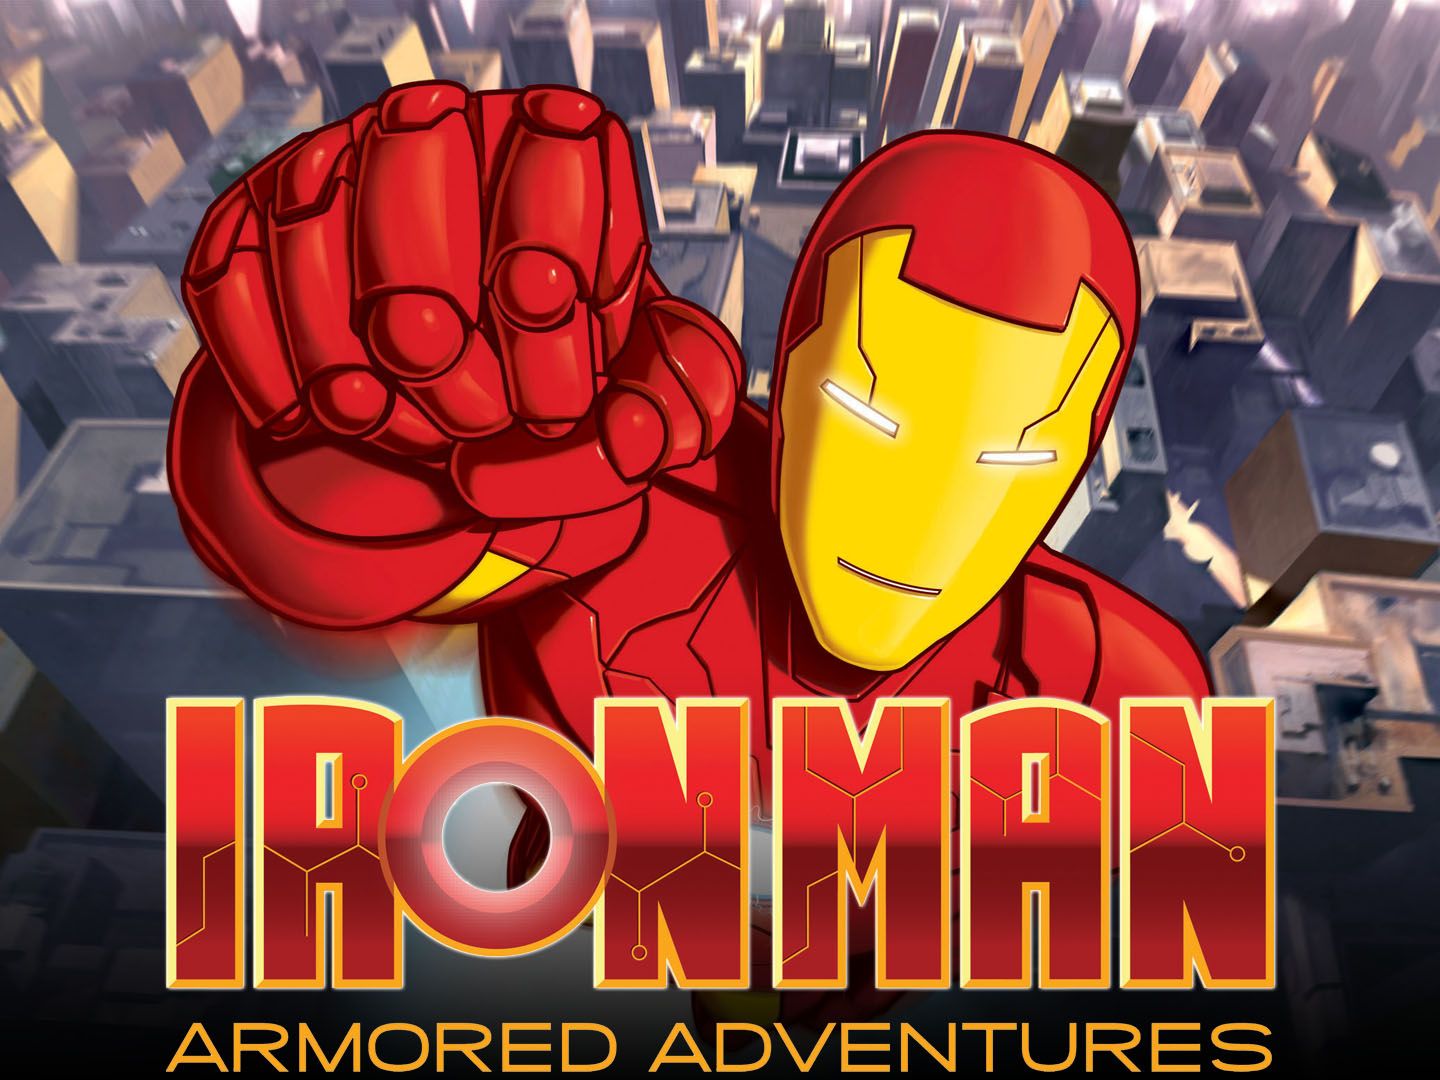 Promotional image for Iron Man Armored Adventures 